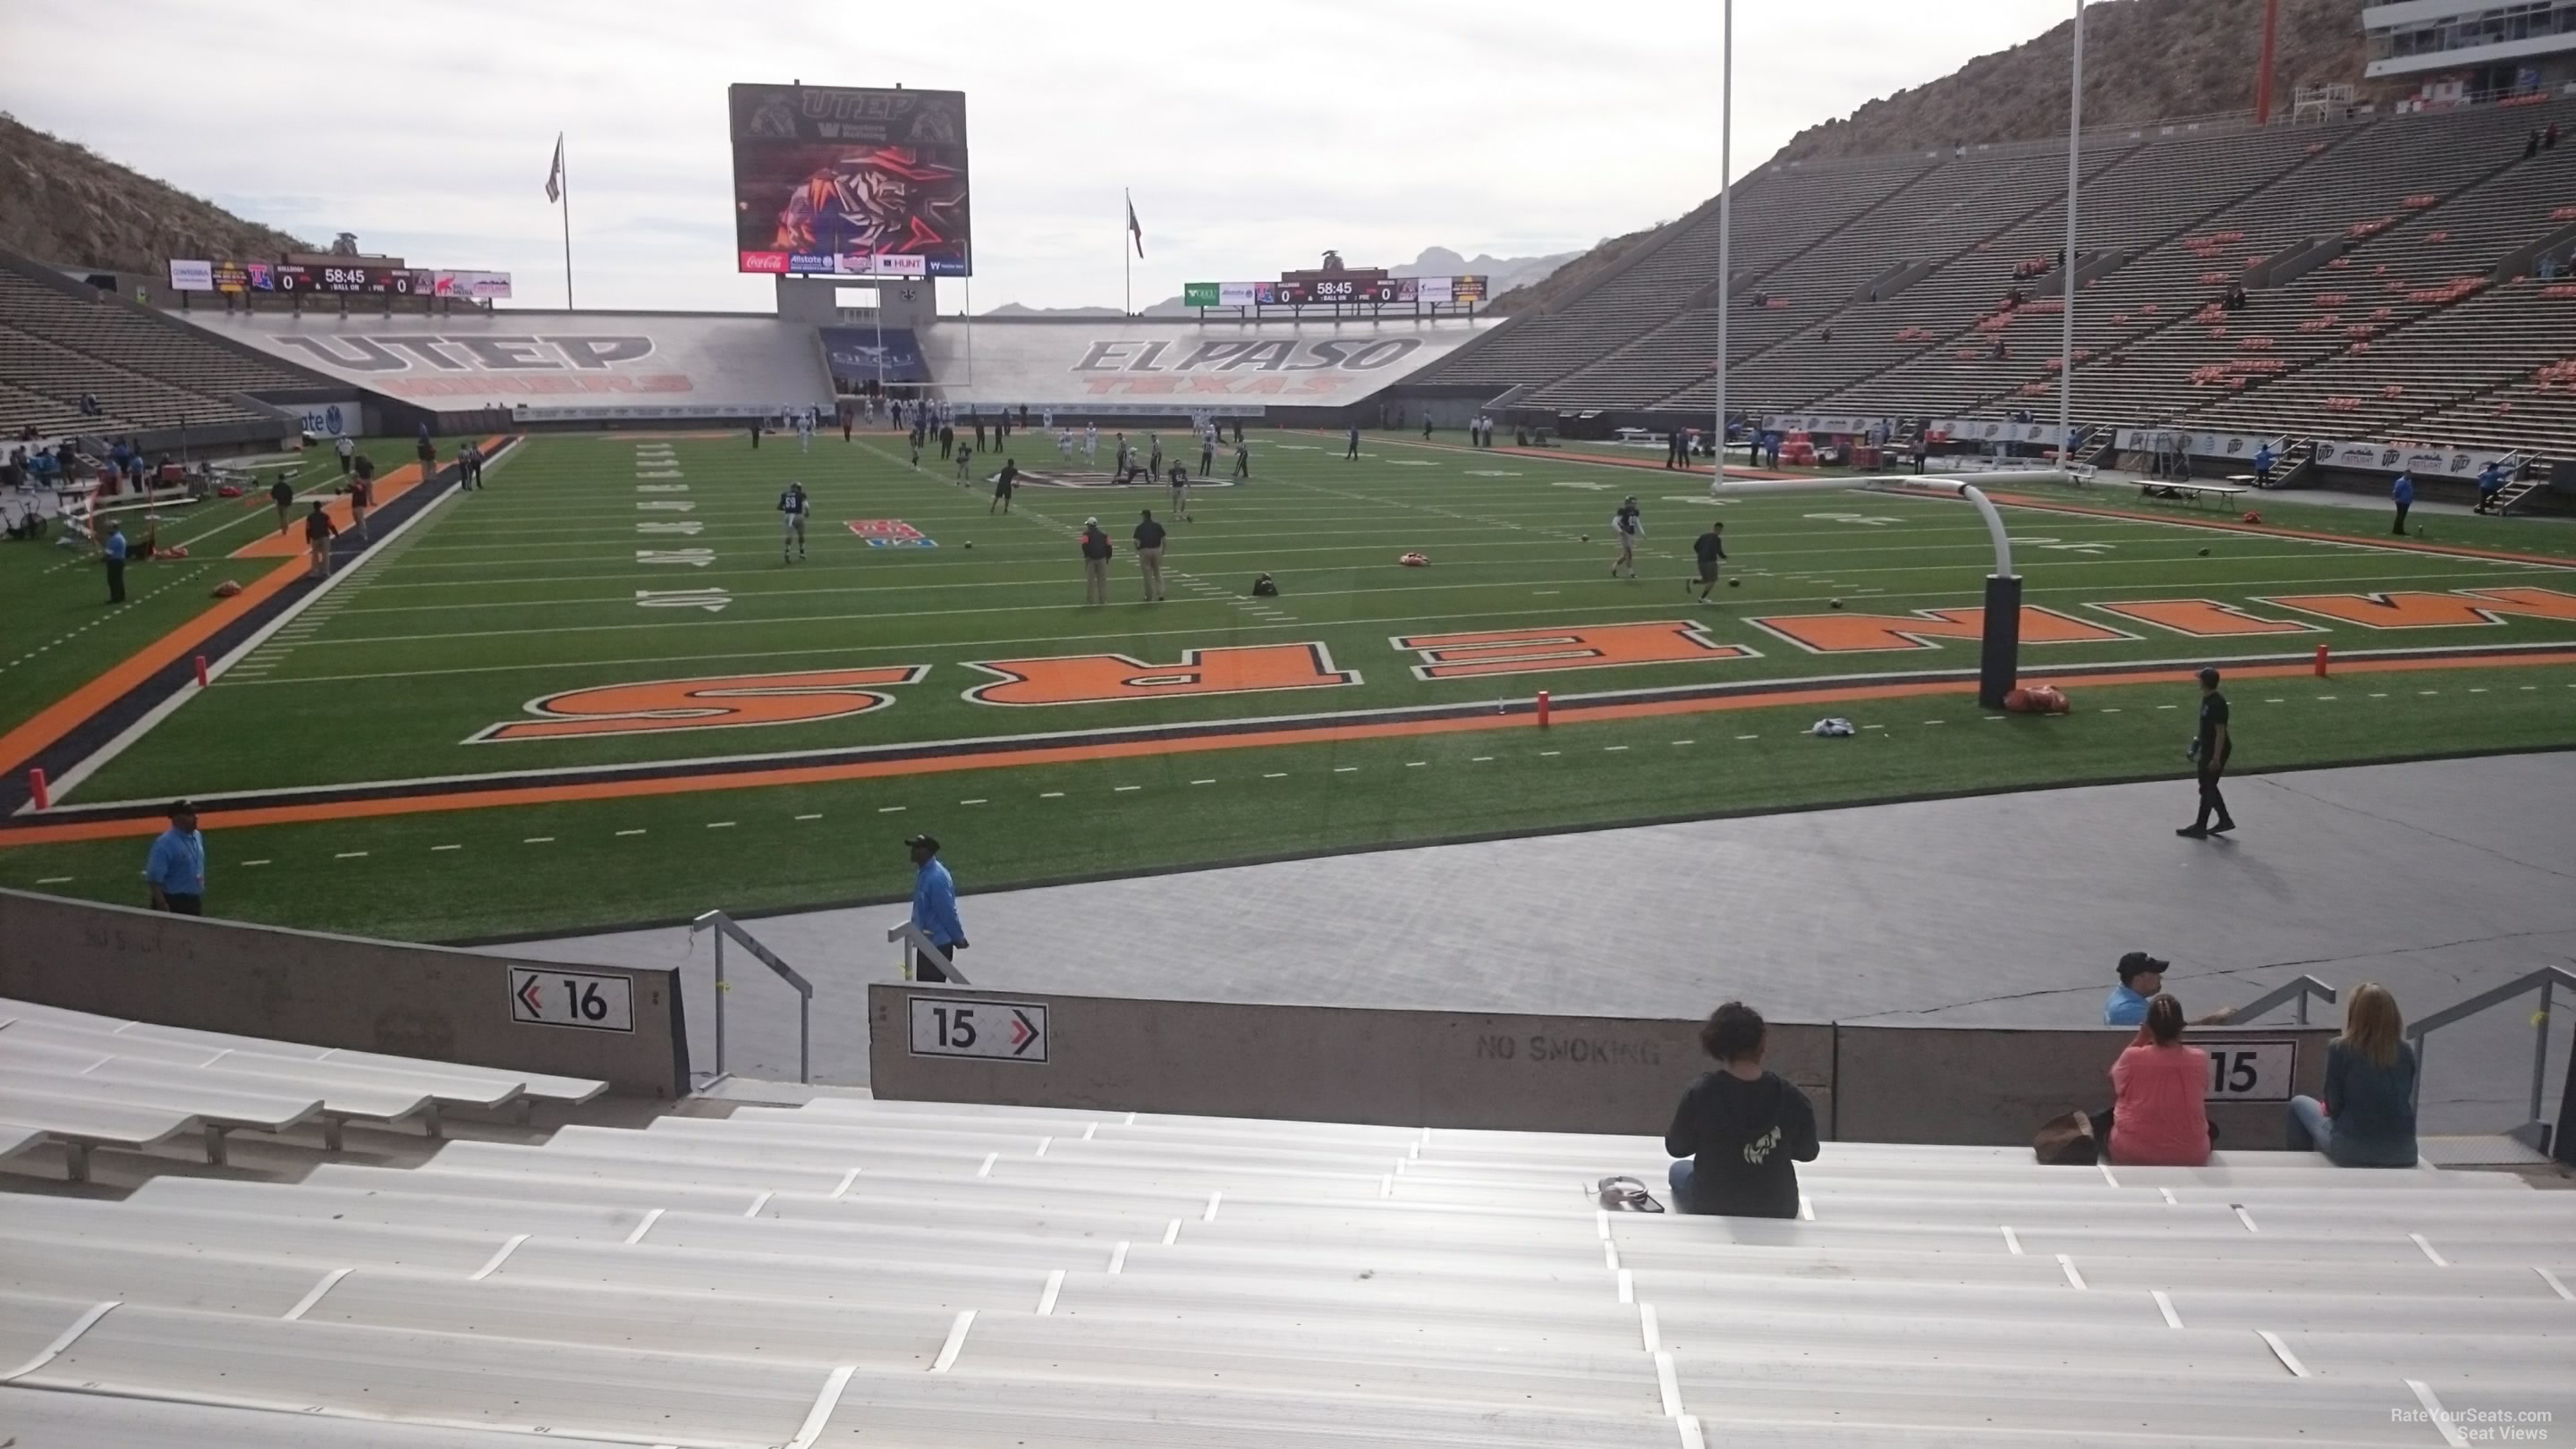 Section 15 at Sun Bowl